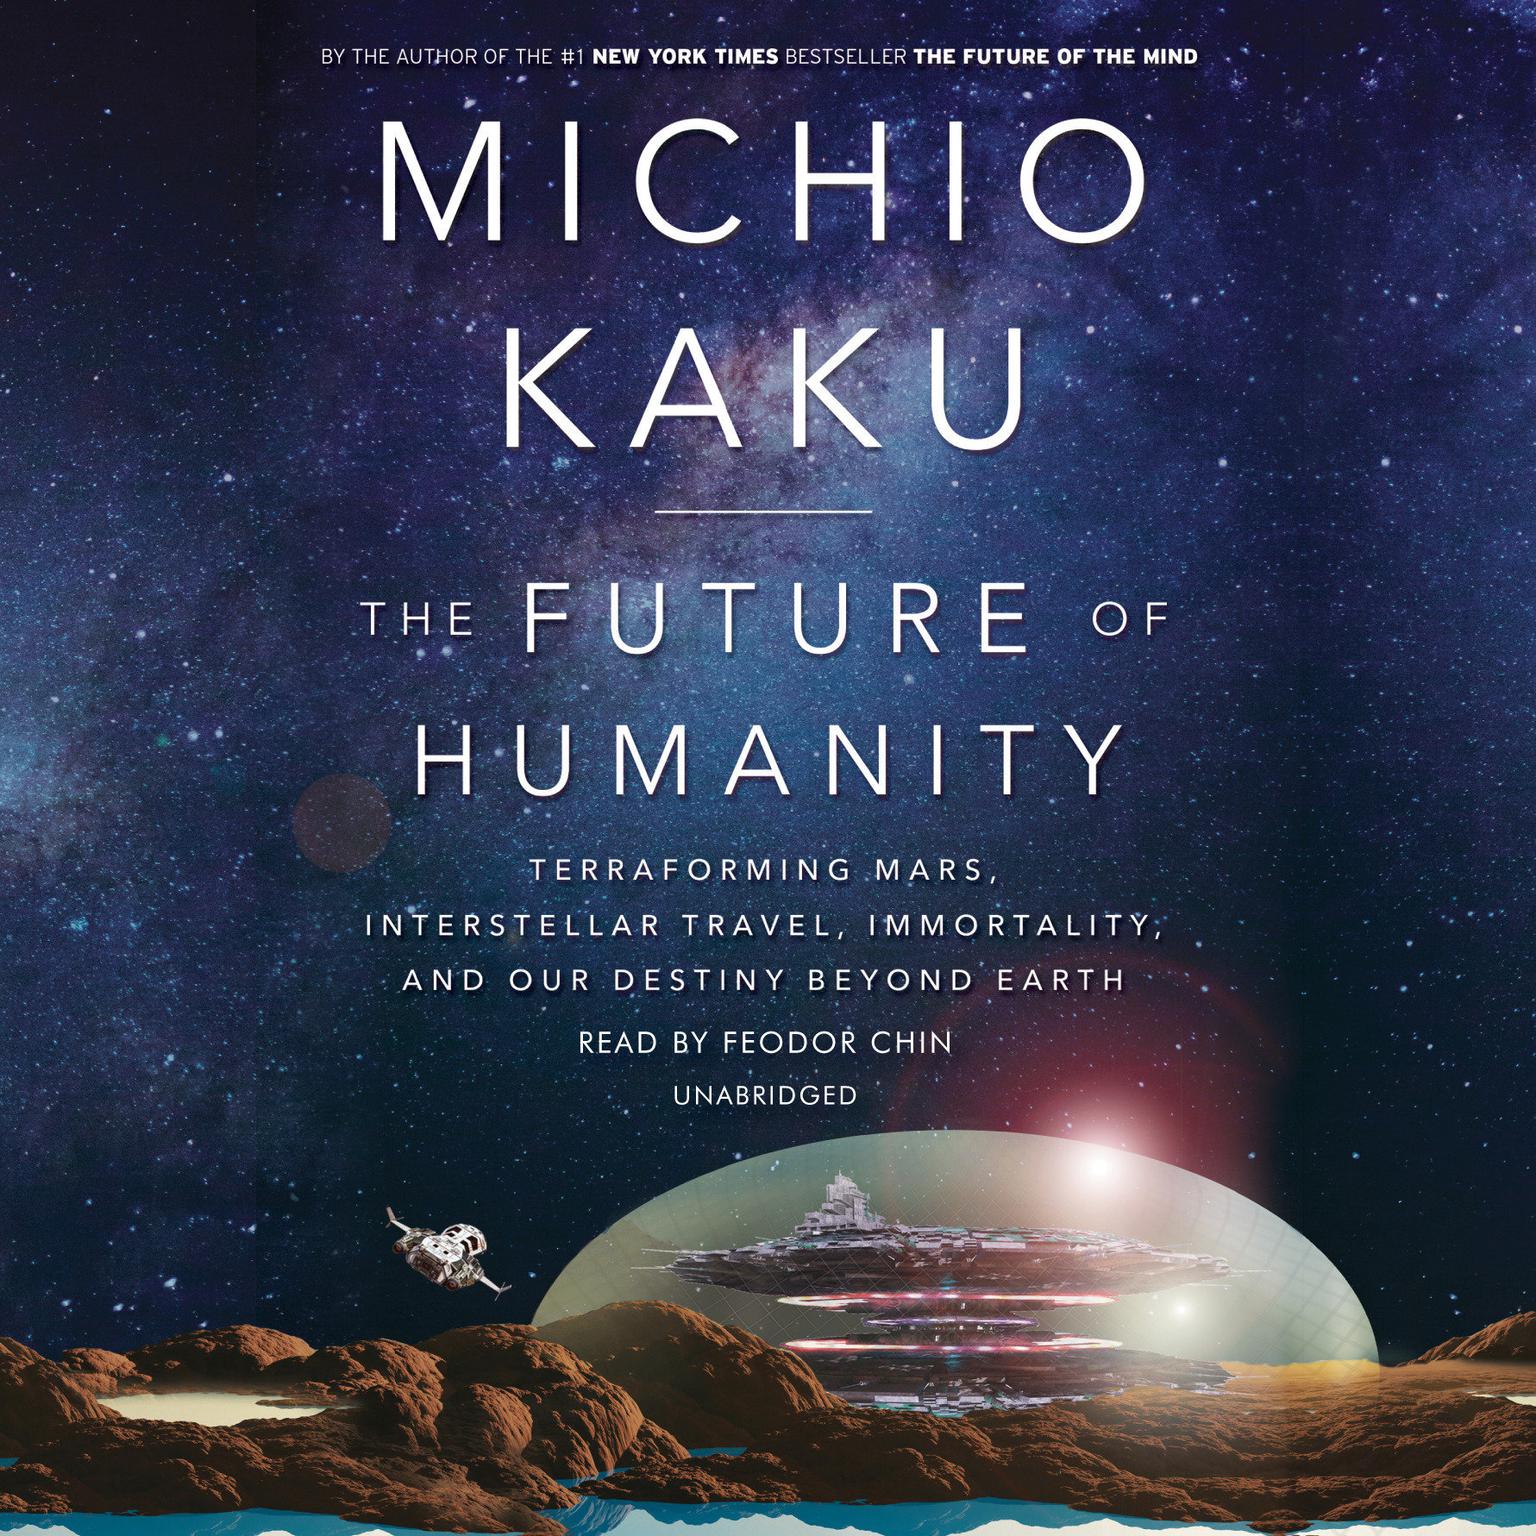 The Future of Humanity: Terraforming Mars, Interstellar Travel, Immortality, and Our Destiny Beyond Earth Audiobook, by Michio Kaku